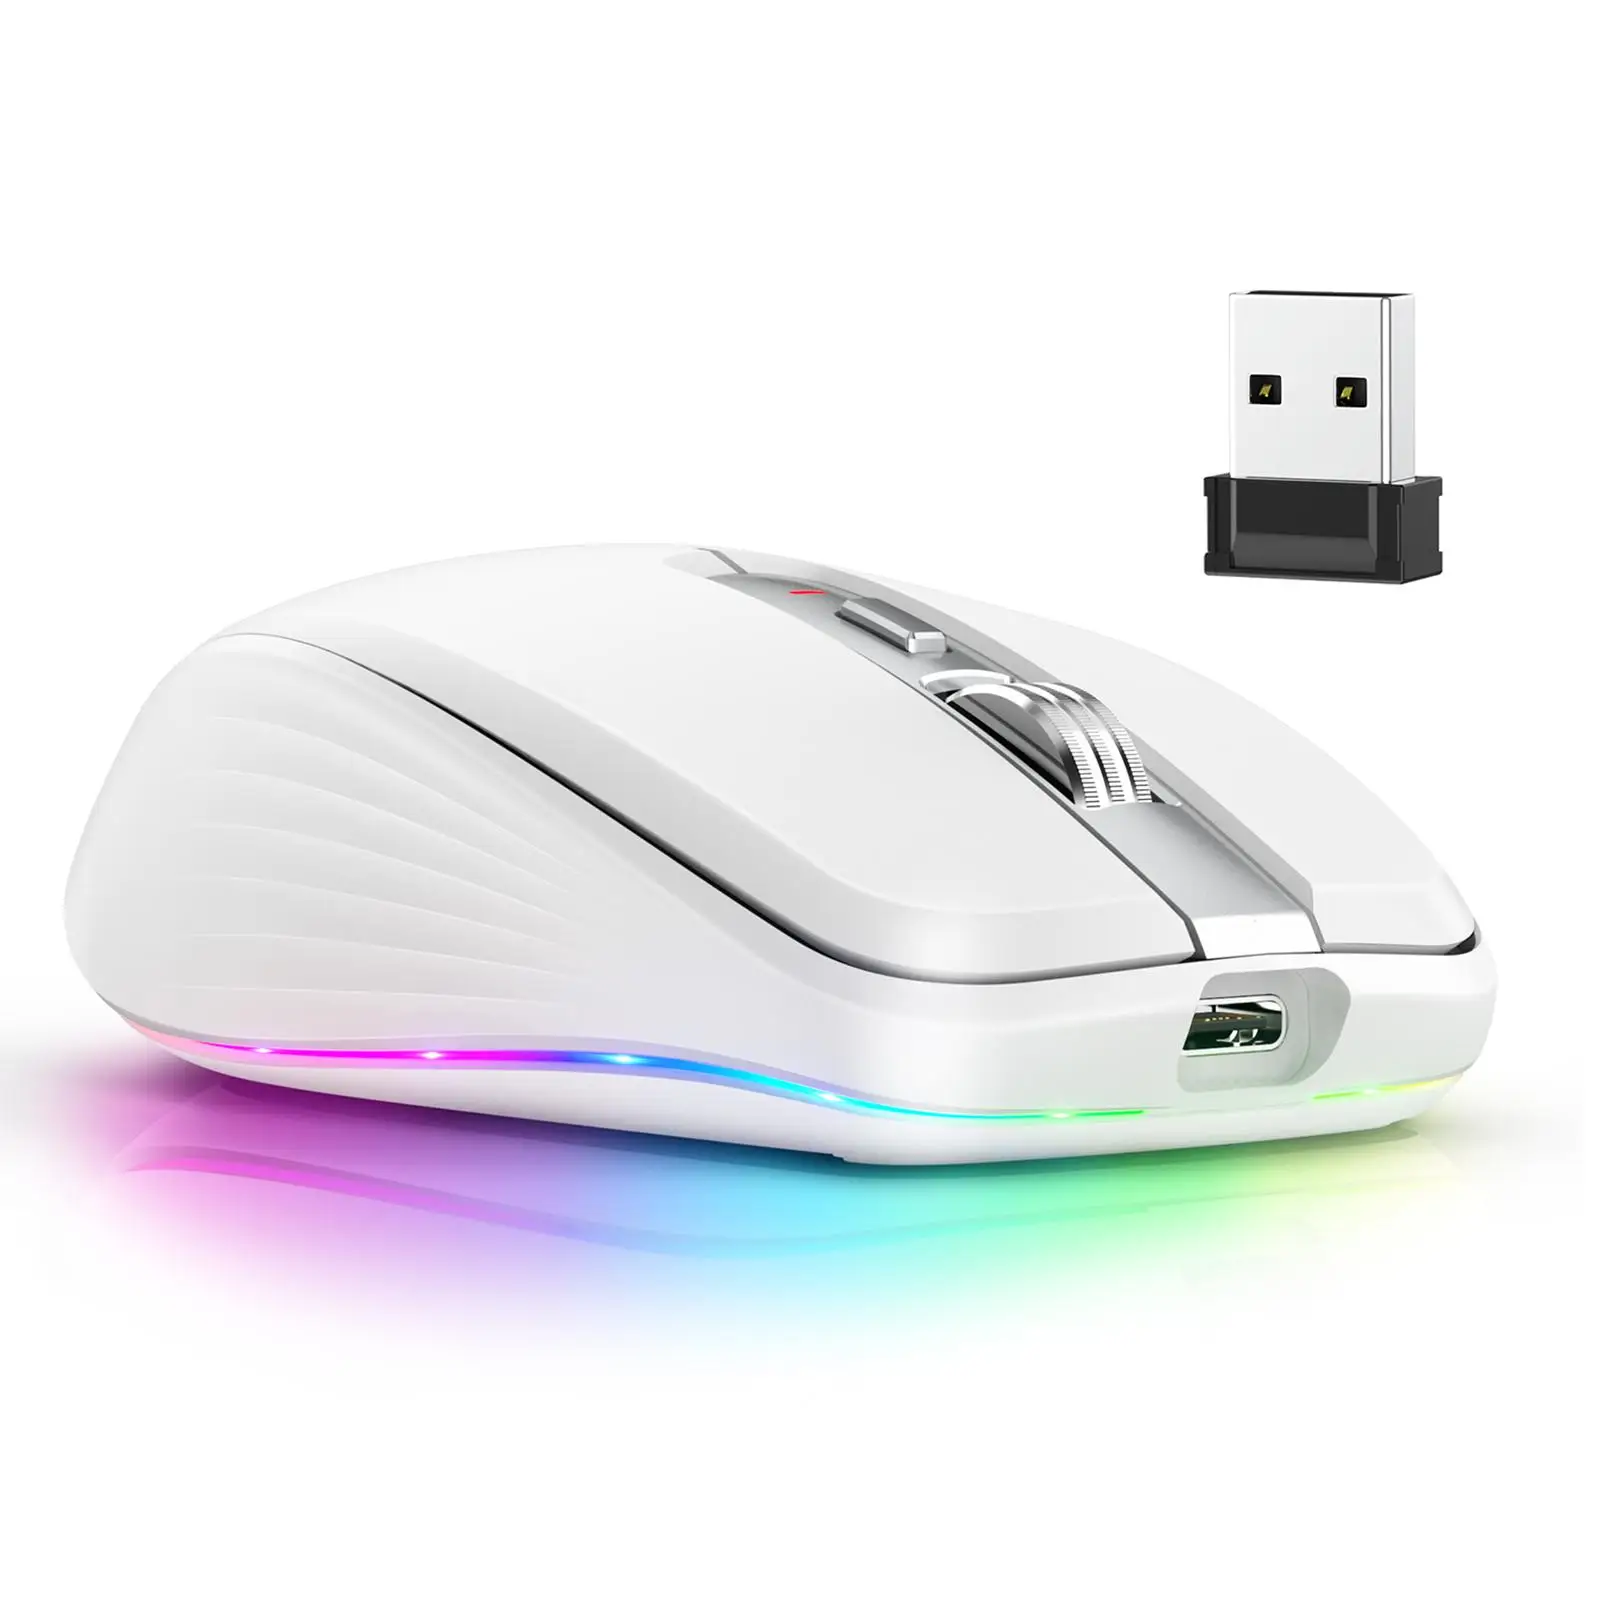 Portable Mini Mouse with USB Receiver 4 Adjustable DPI RGB Light 6 Buttons Silent Mute Cordless Optical Mouse for Laptop PC